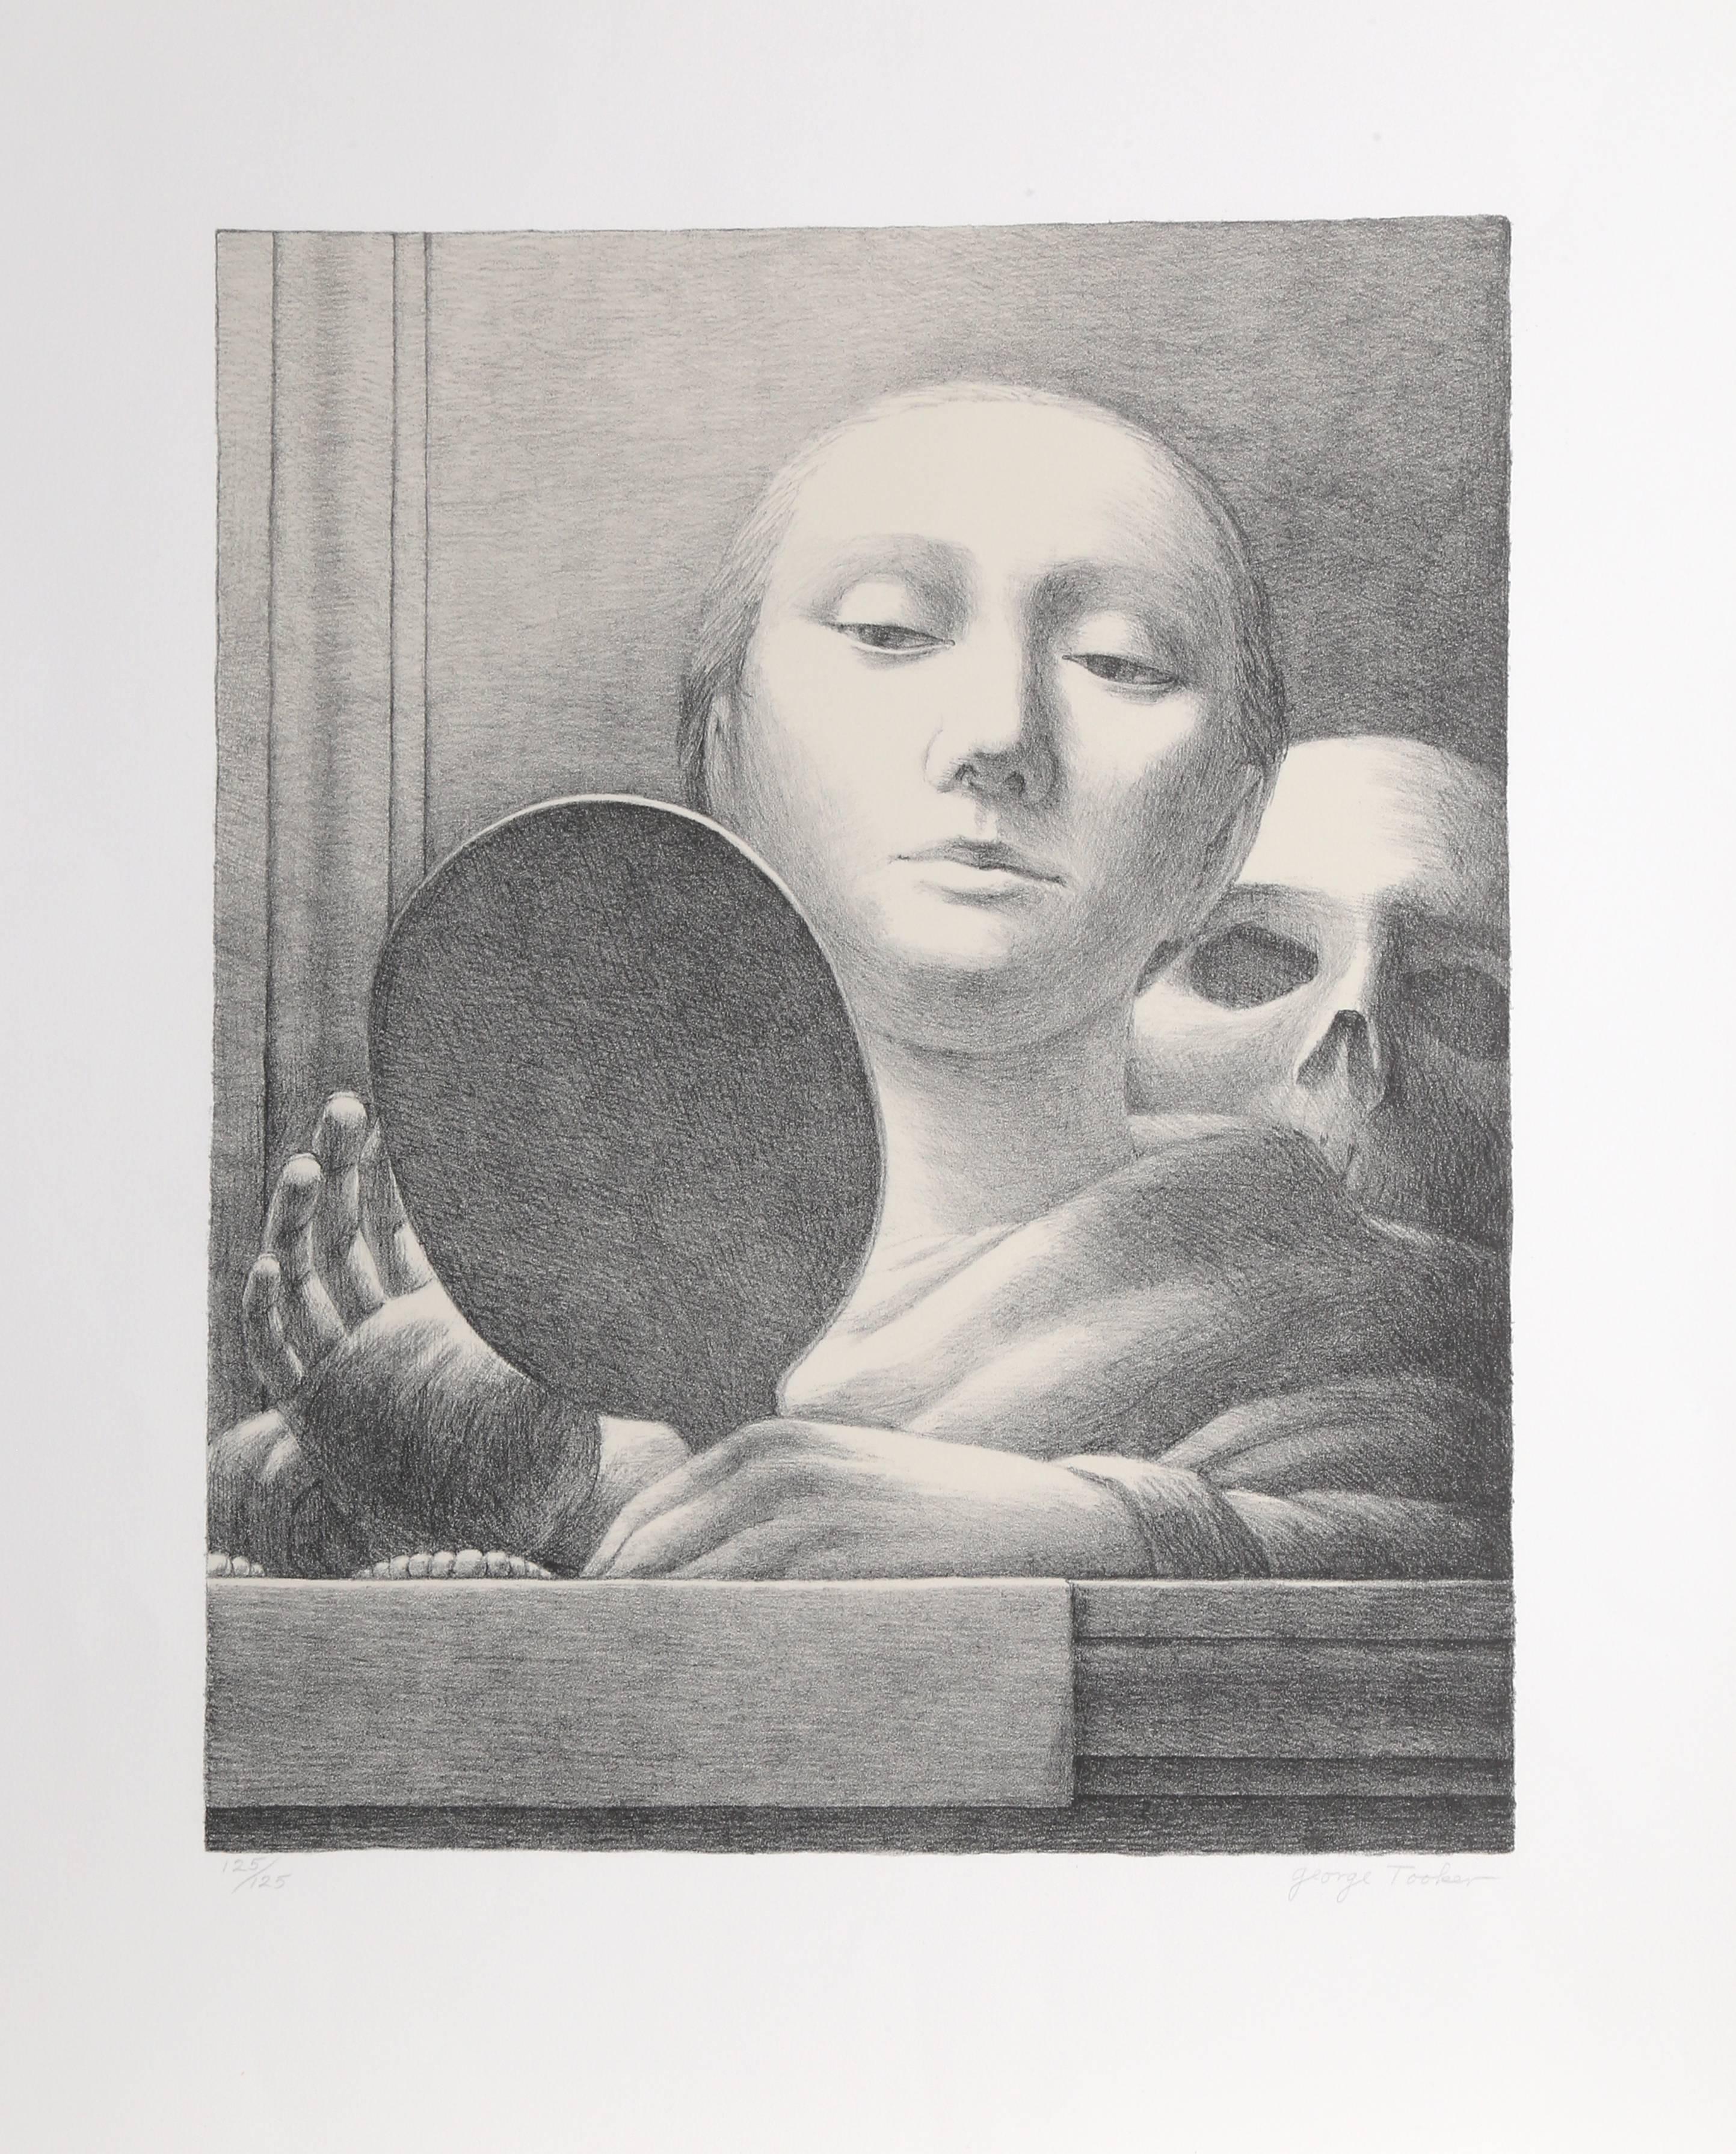 This lithograph was created by American artist George Tooker. His subjects often are depicted naturally as in a photograph, but the images use flat tones, an ambiguous perspective, and alarming juxtapositions to suggest an imagined or dreamed